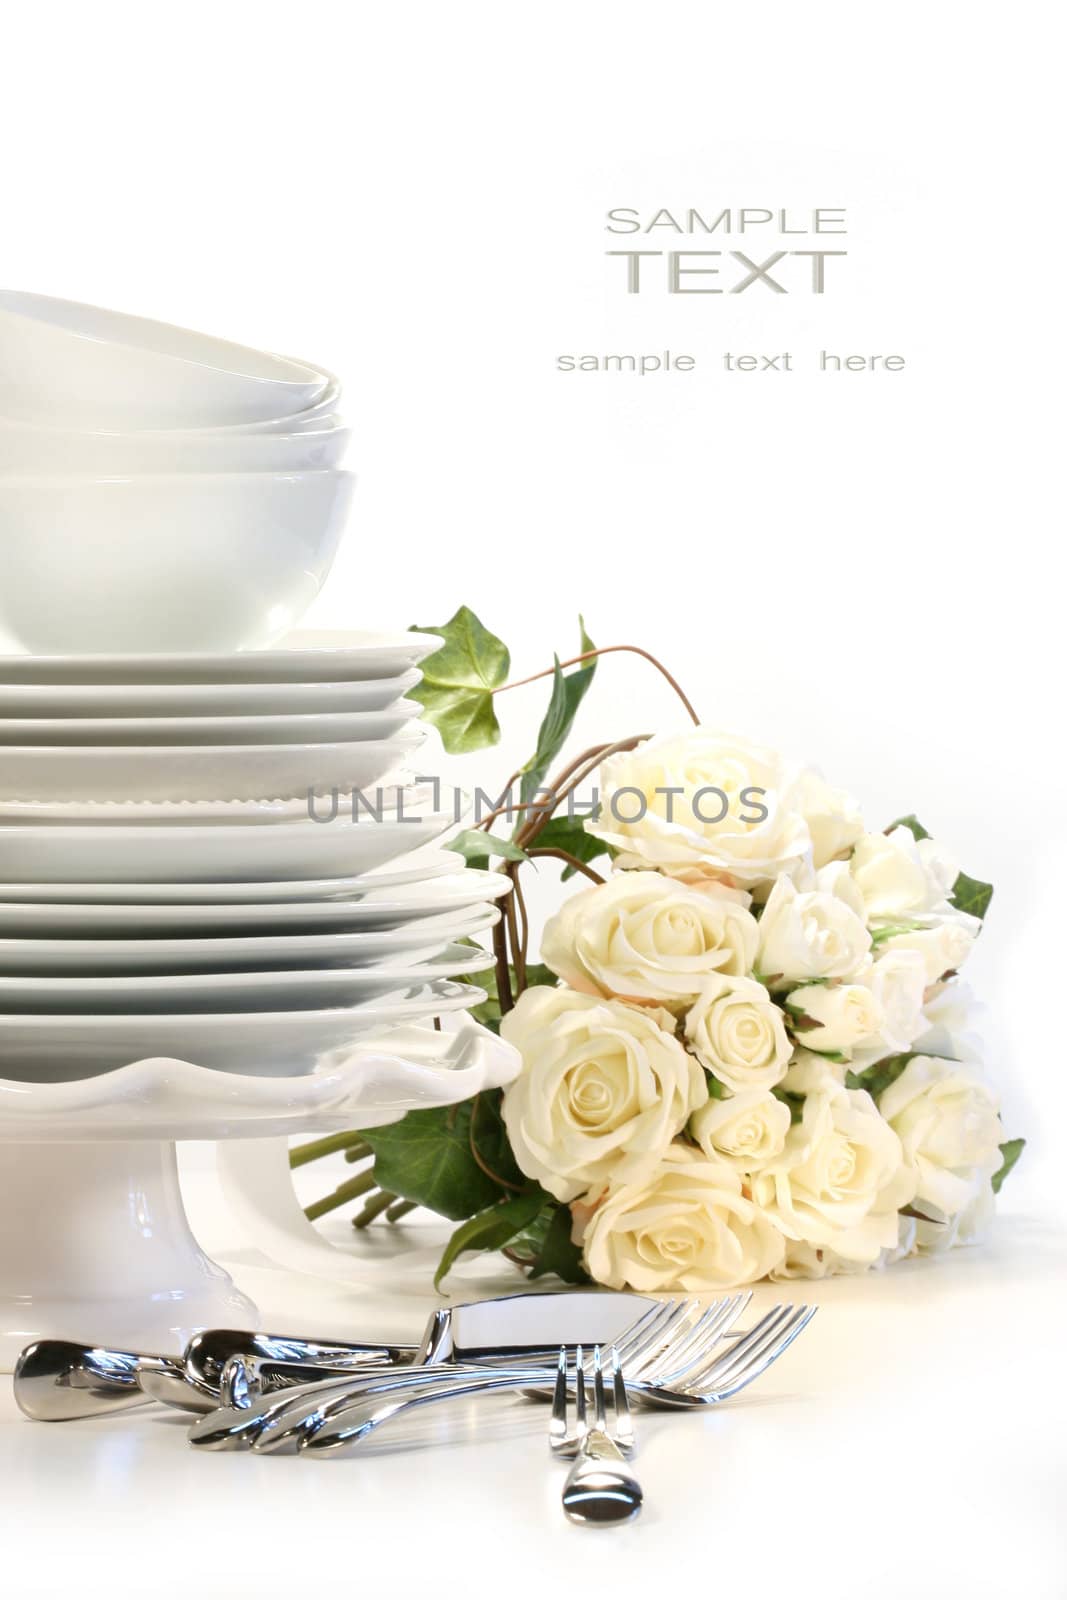 Assortment of plates for wedding  by Sandralise